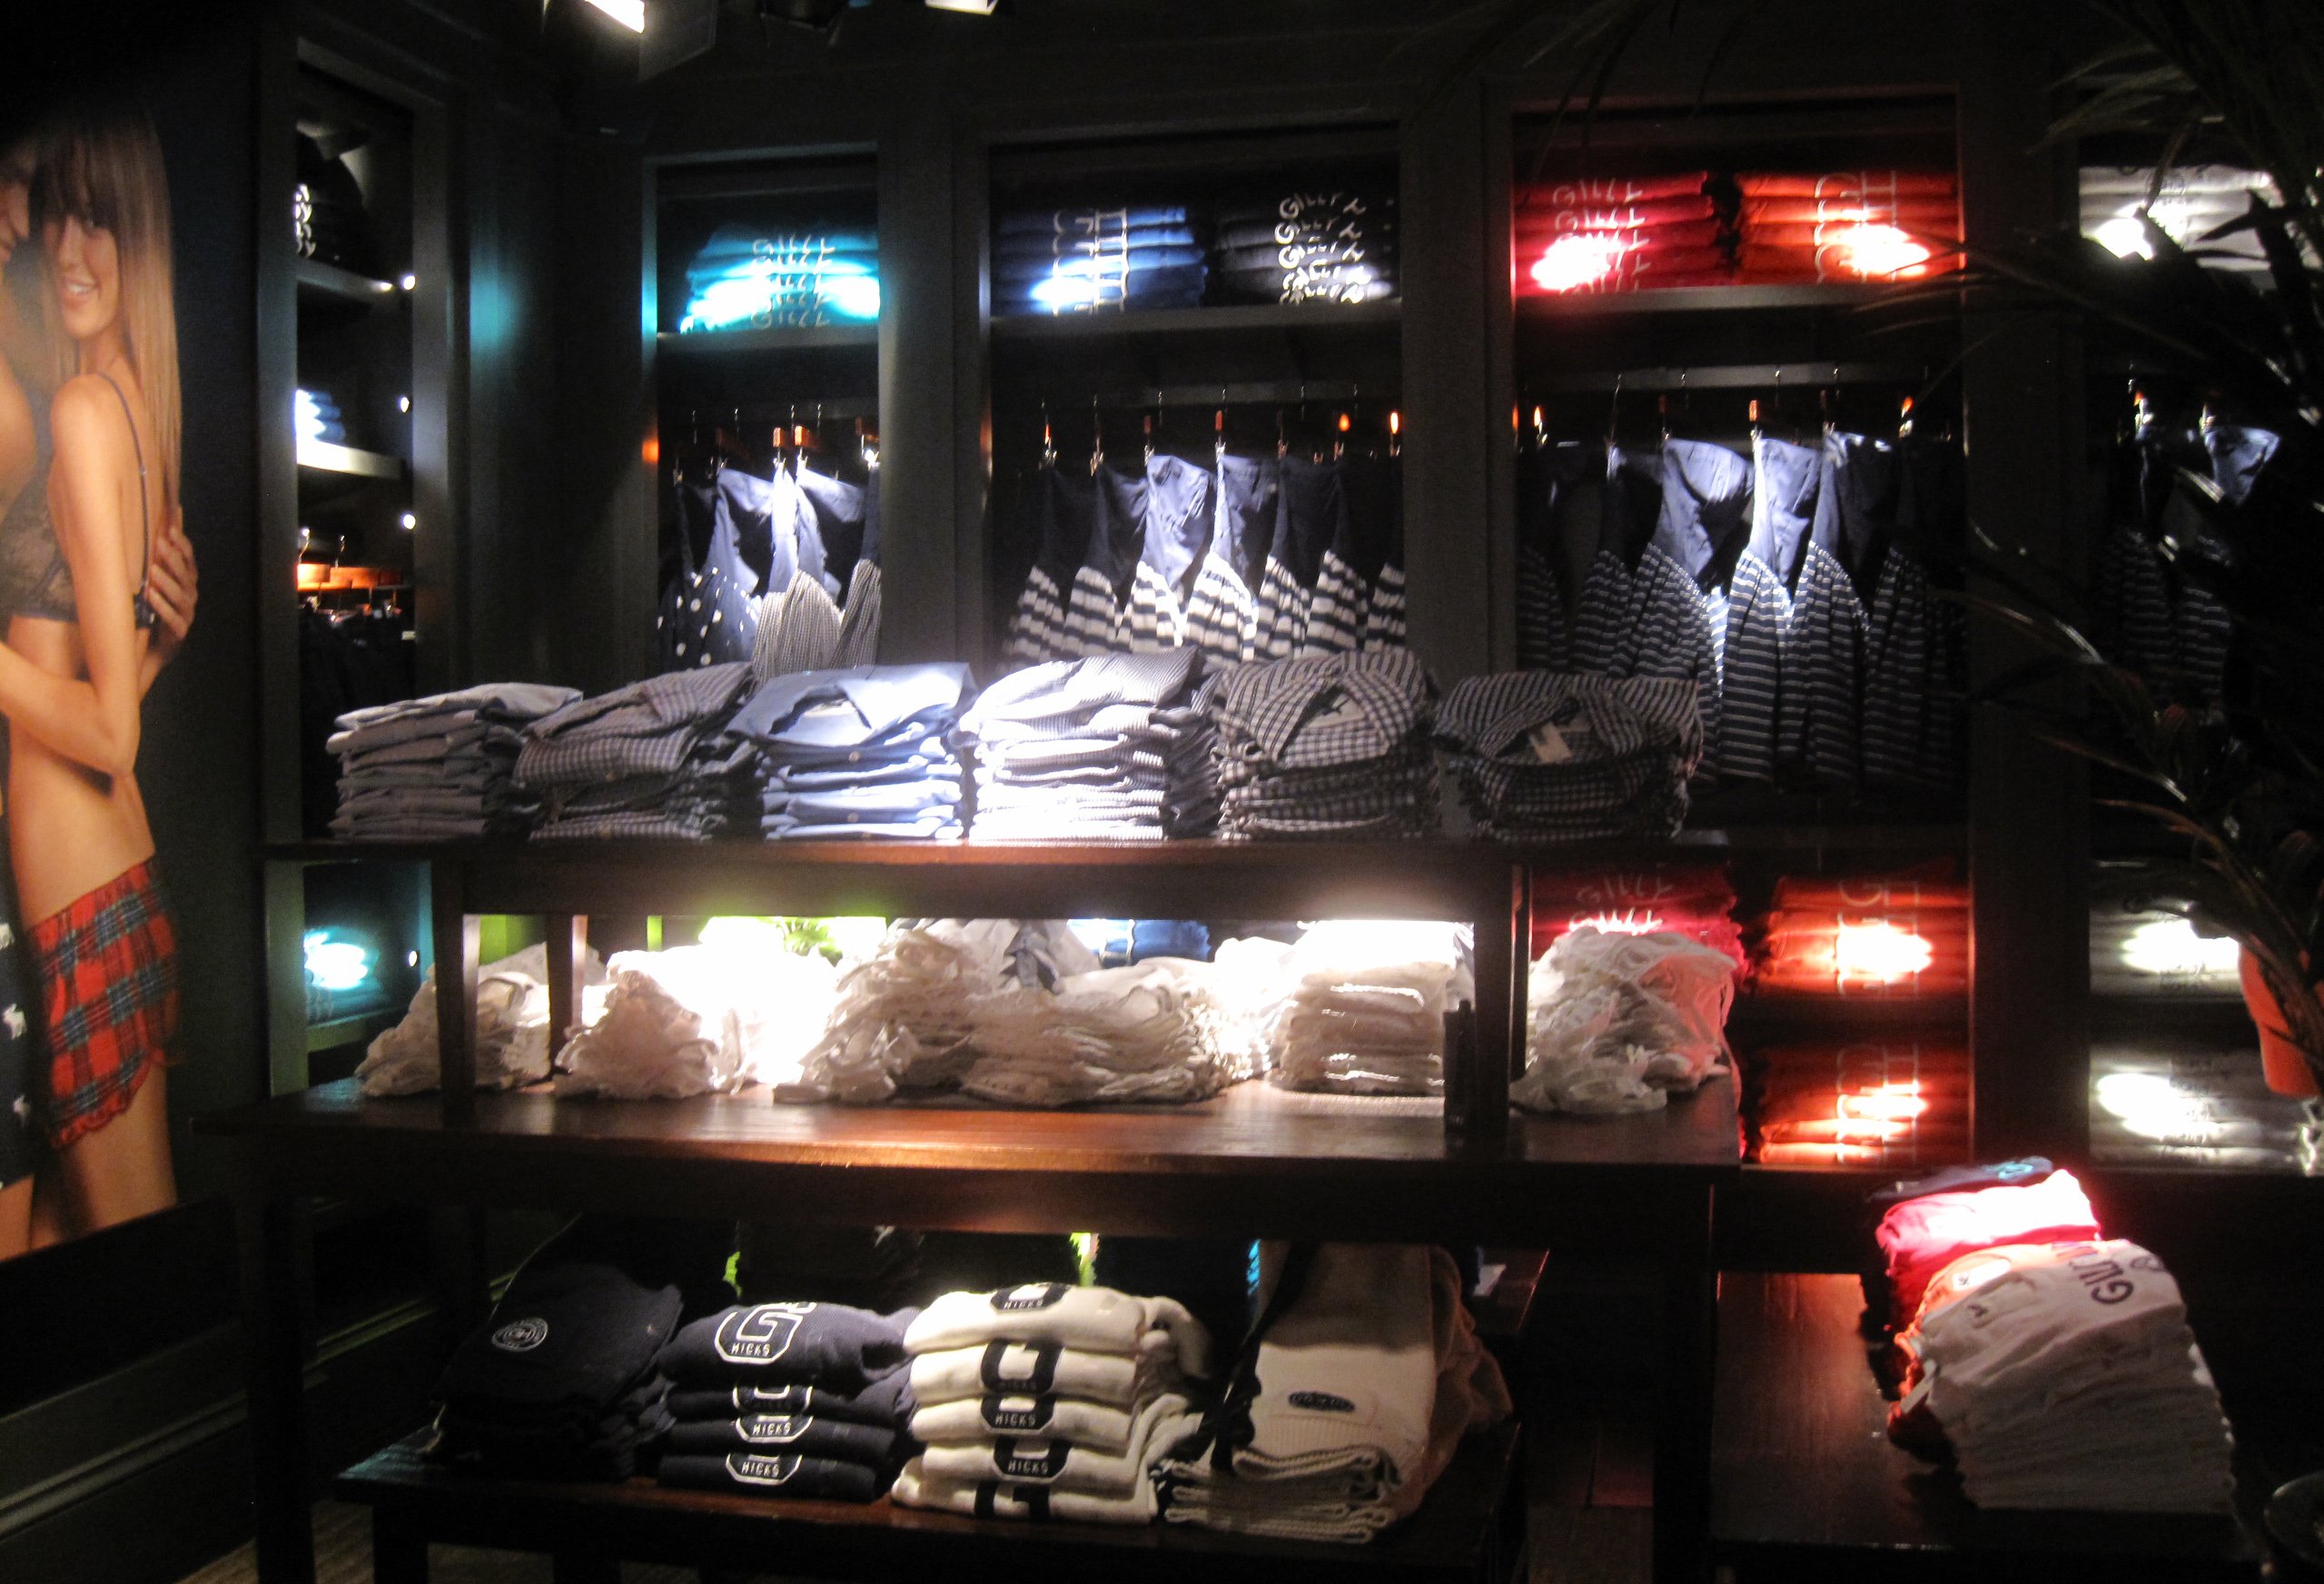 Abercrombie & Fitch opens new standalone Gilly Hicks store at Easton